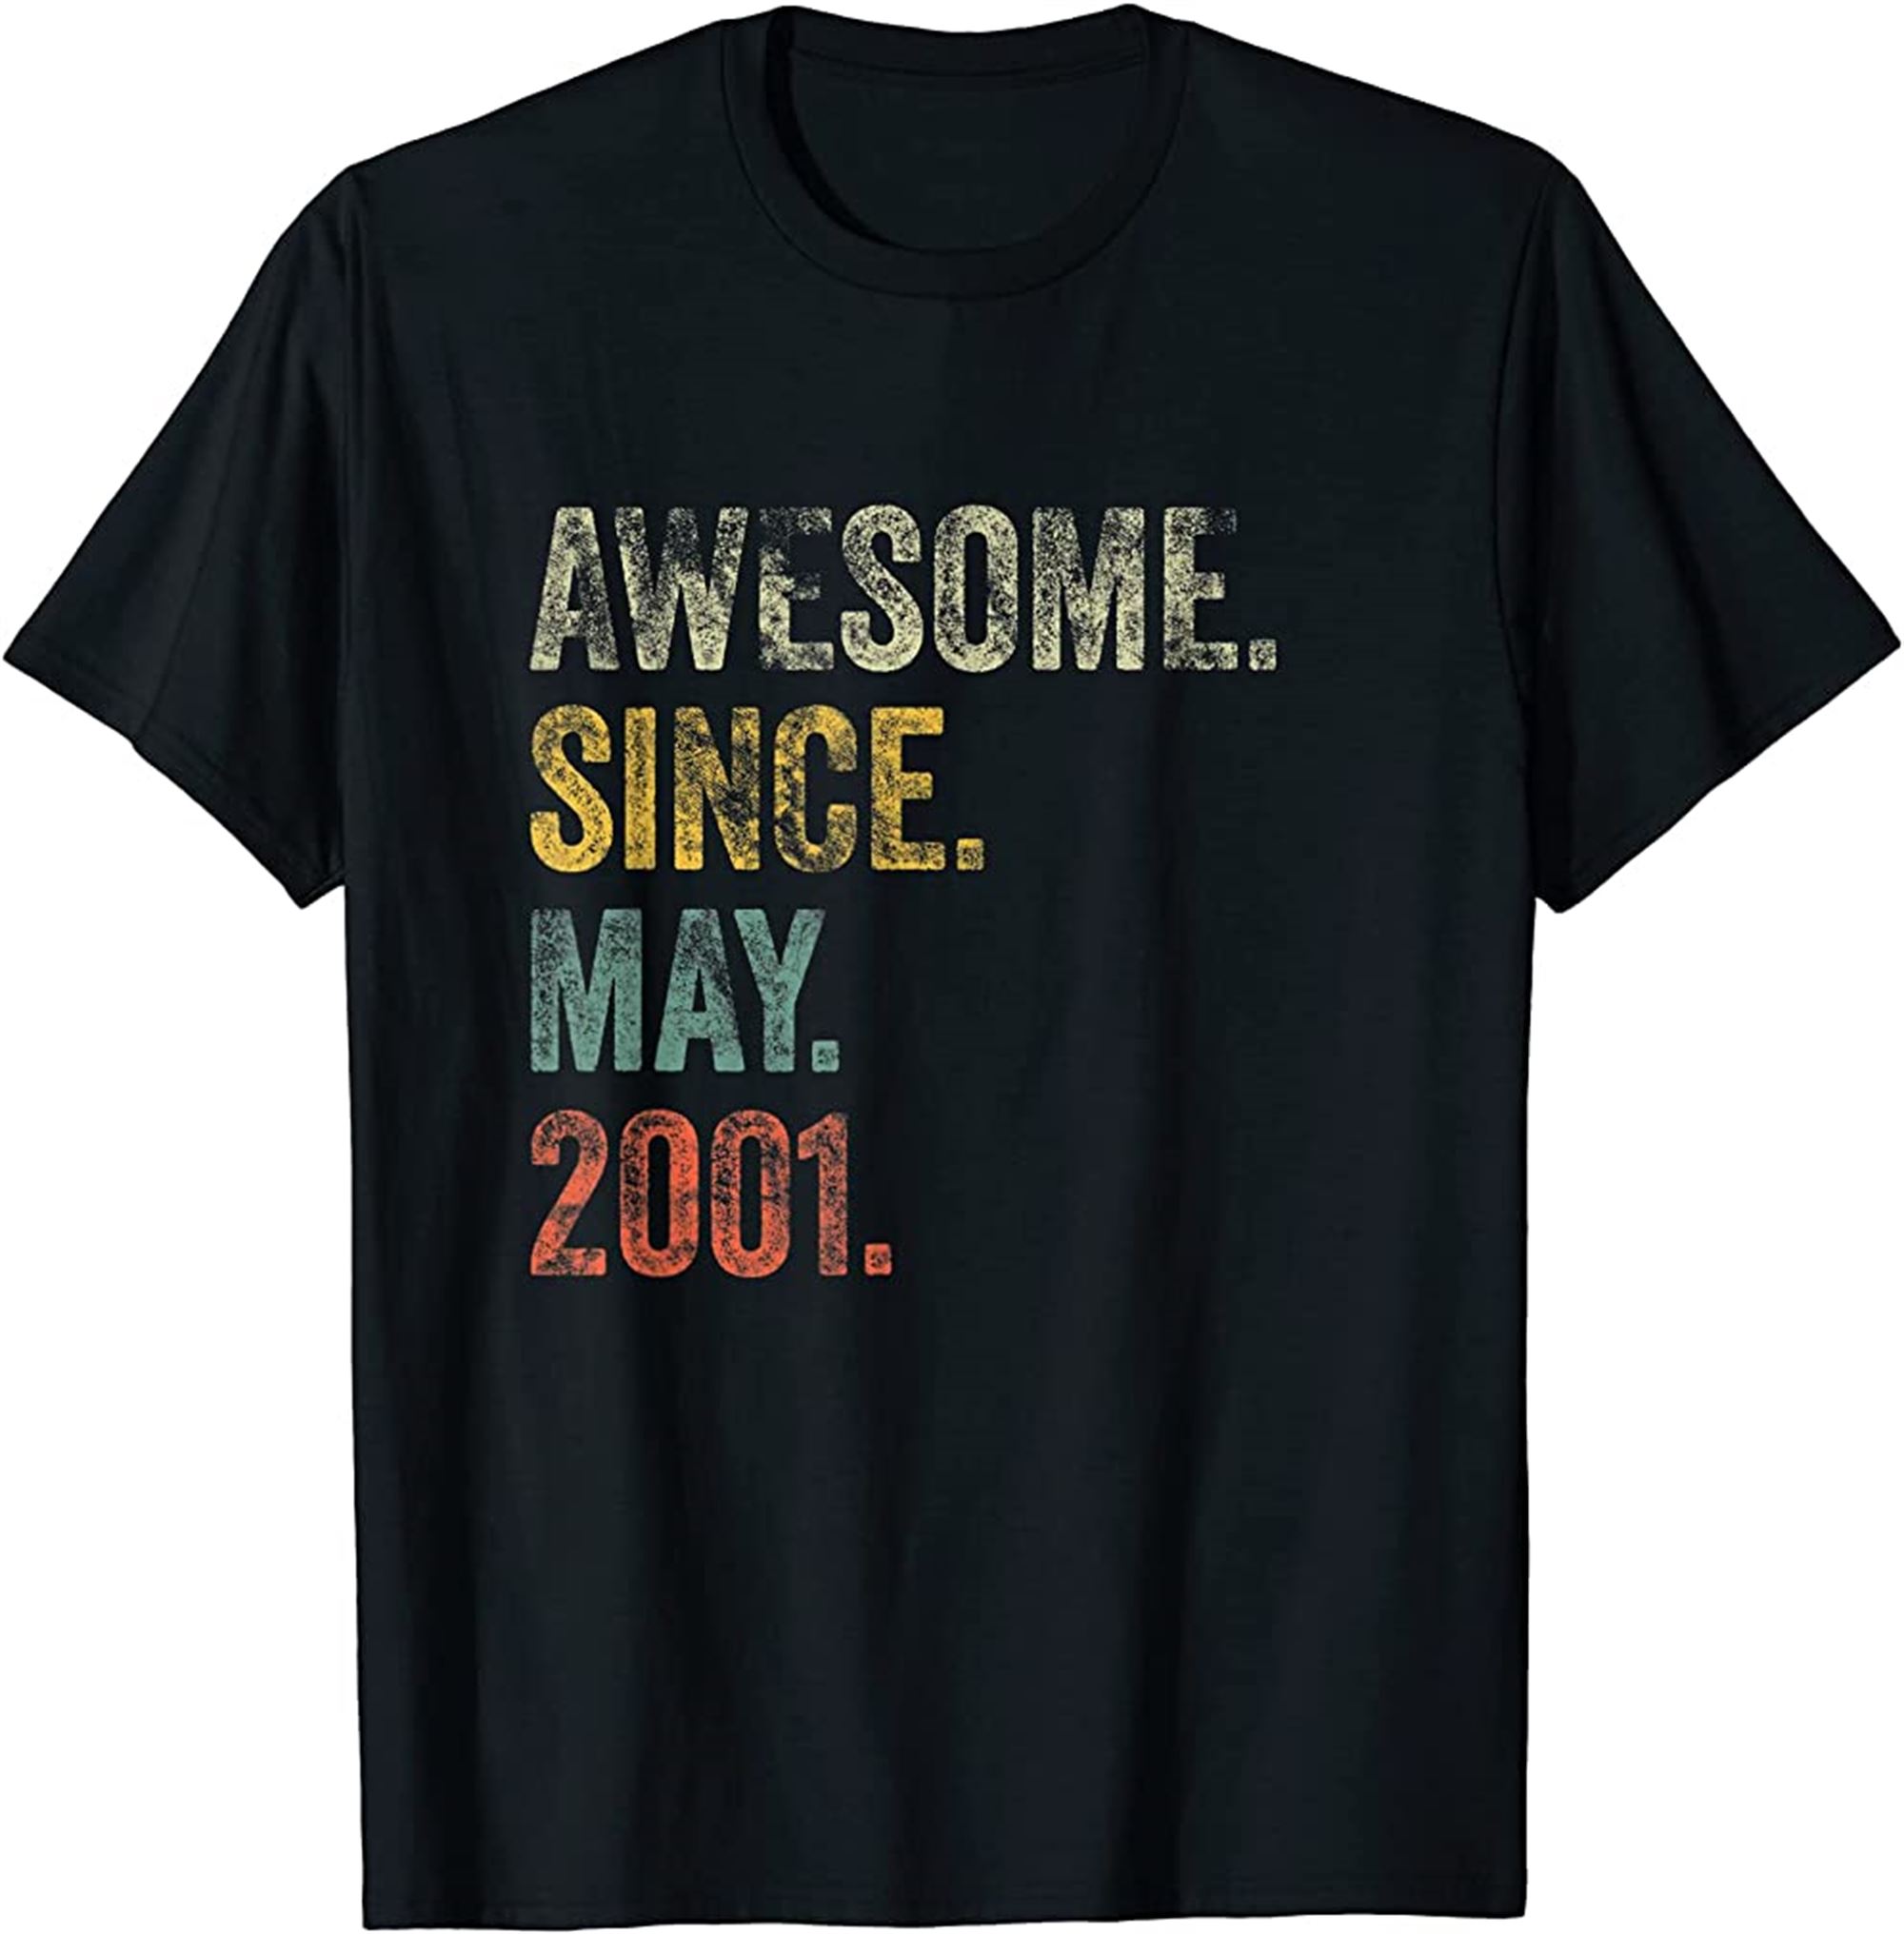 Vintage 2001 21st Birthday Awesome Since May 2001 T-shirt Full Size Up To 5xl